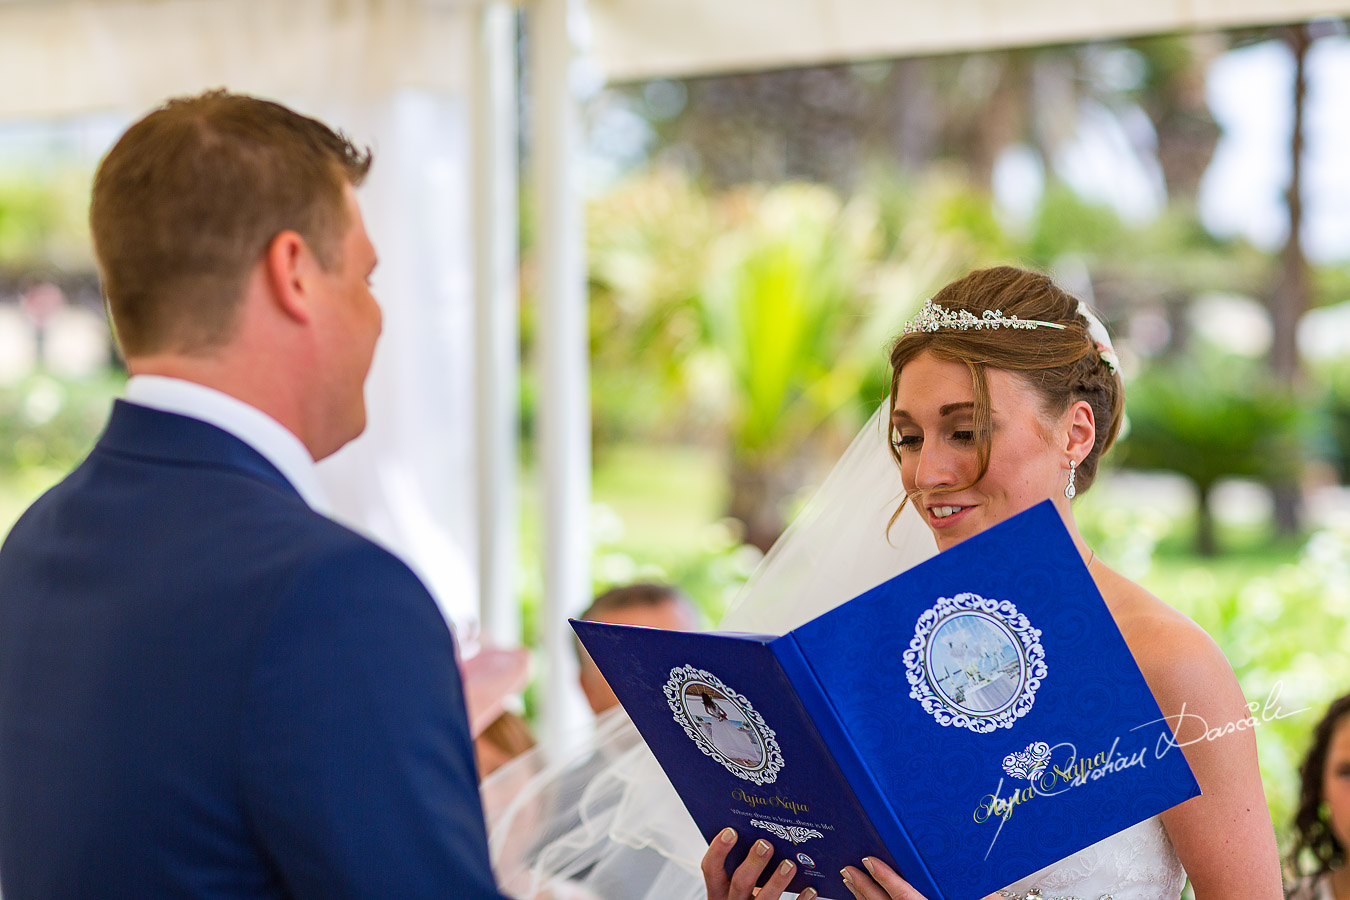 Alicia reading her vows, moment photographed at Nissi Beach Resort in Ayia Napa, Cyprus by Cristian Dascalu.